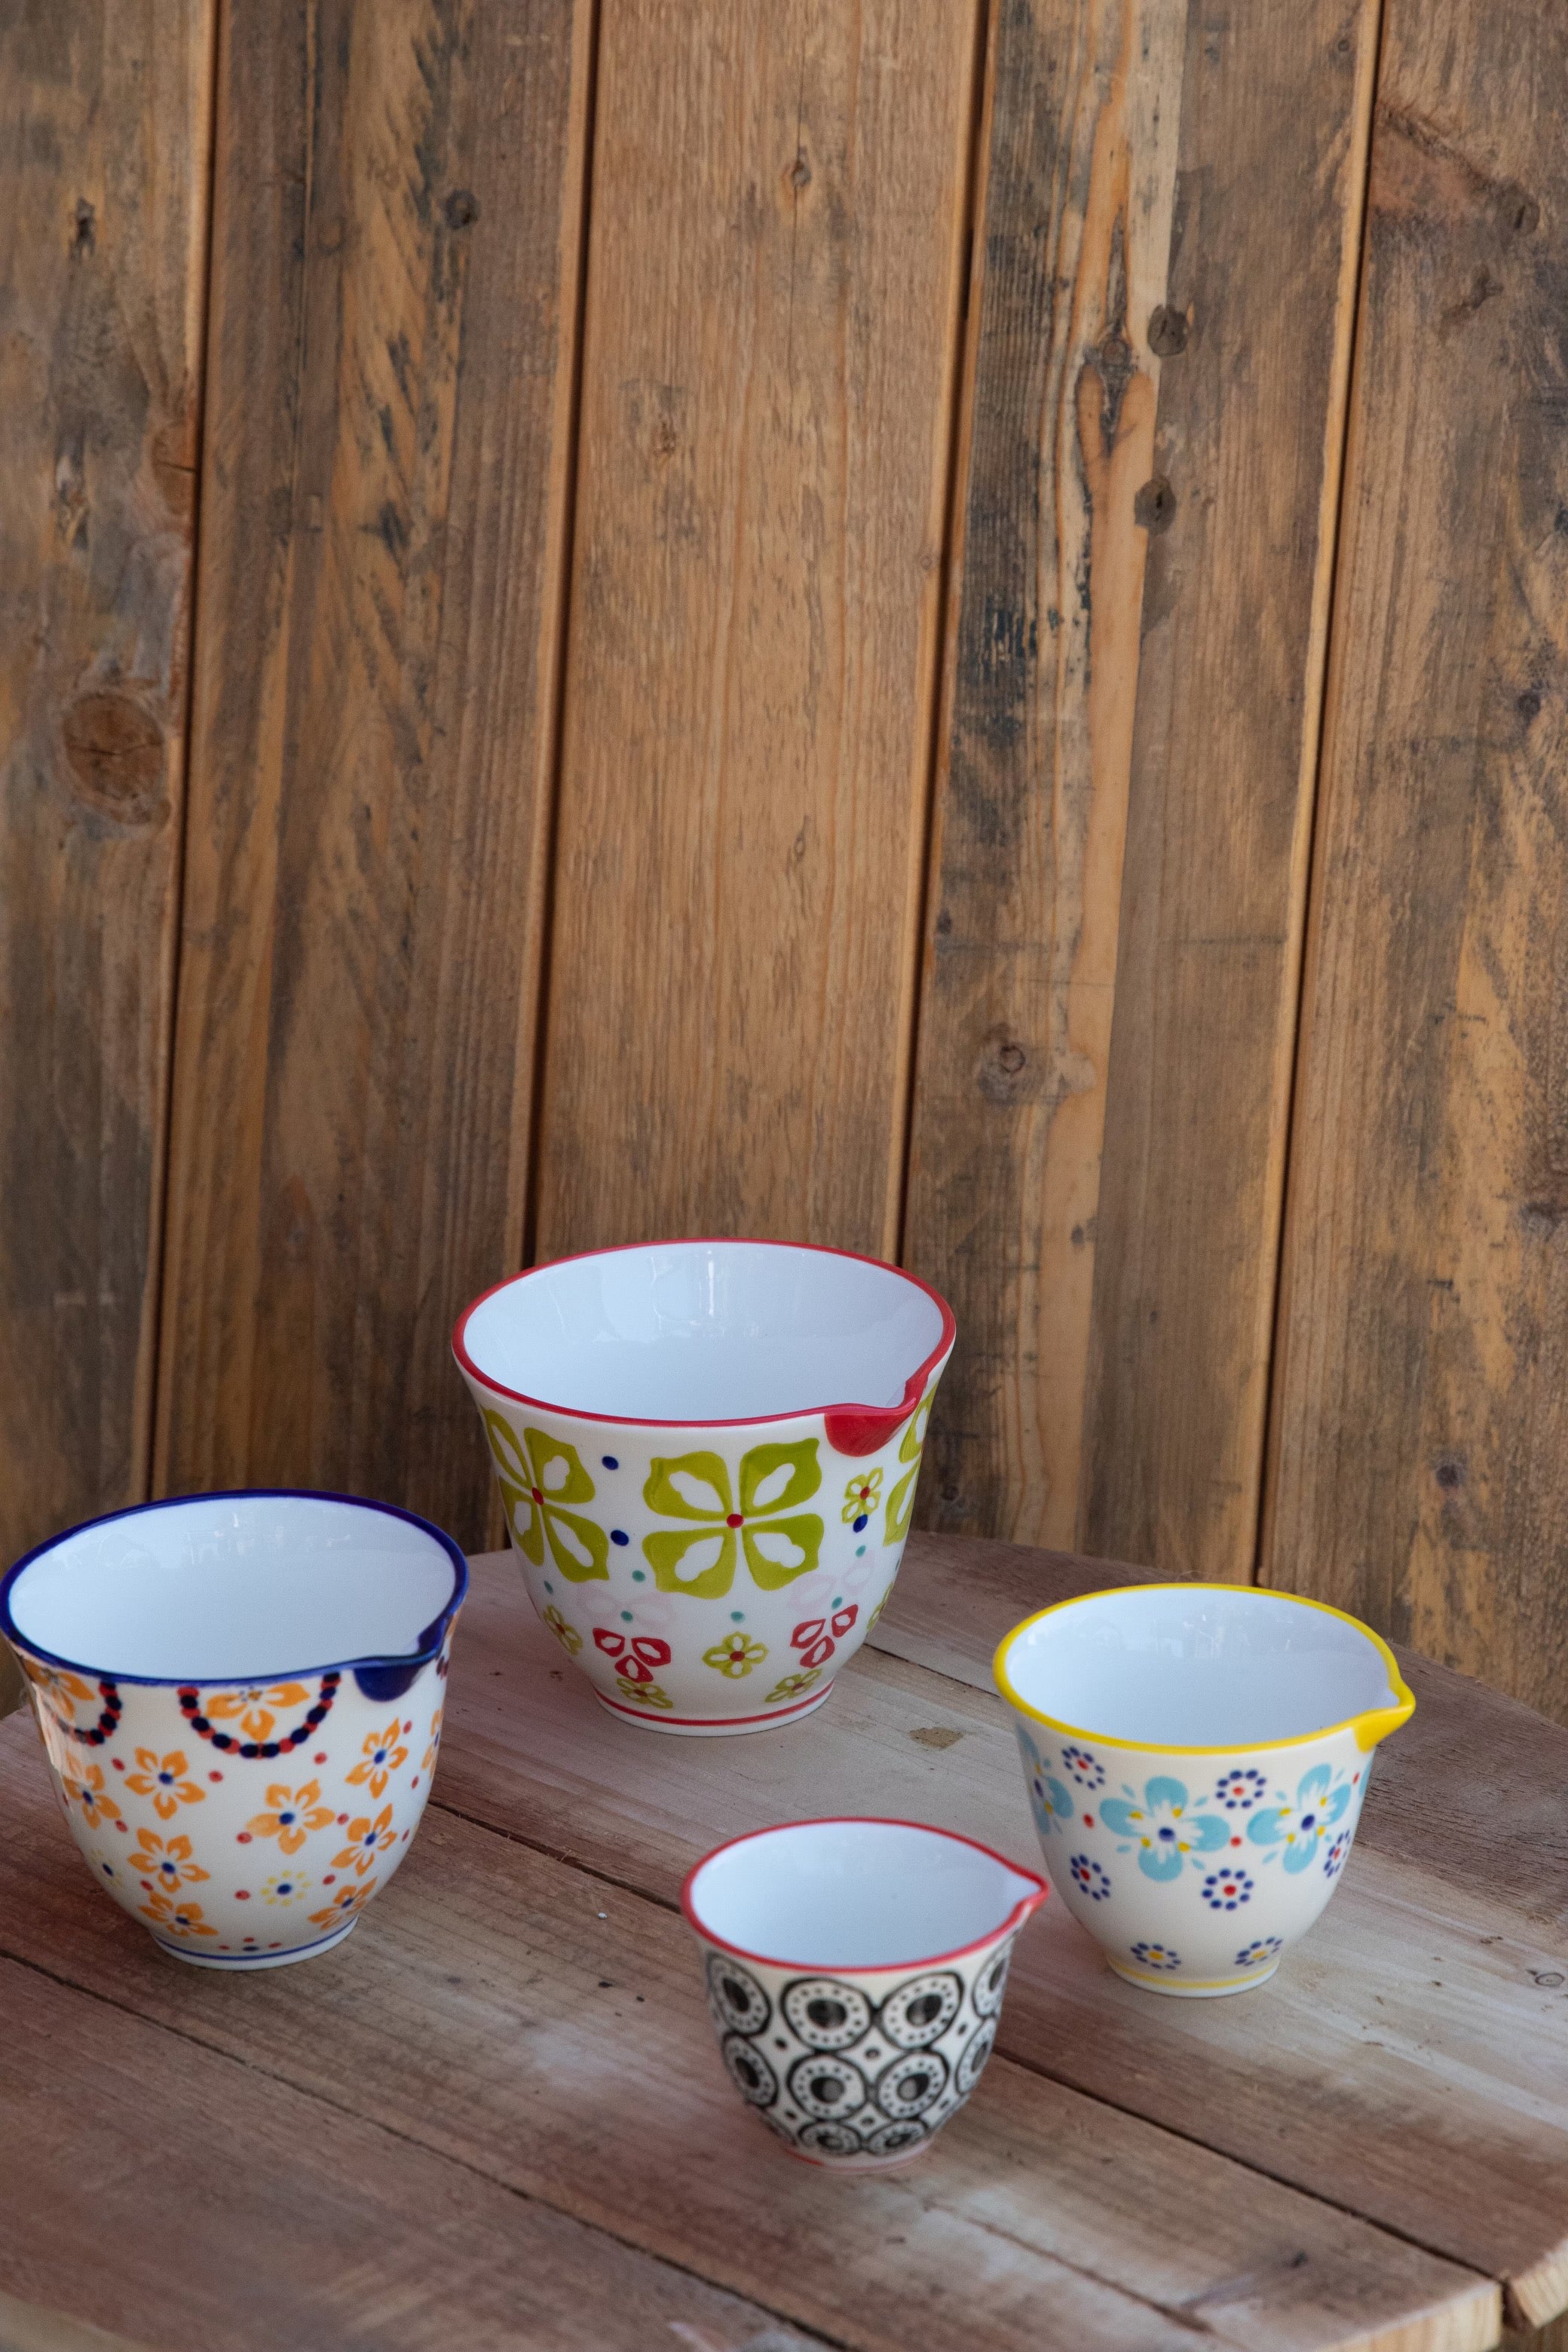 Set of 4 Hand-Painted Stoneware Measuring Cups with Floral Pattern